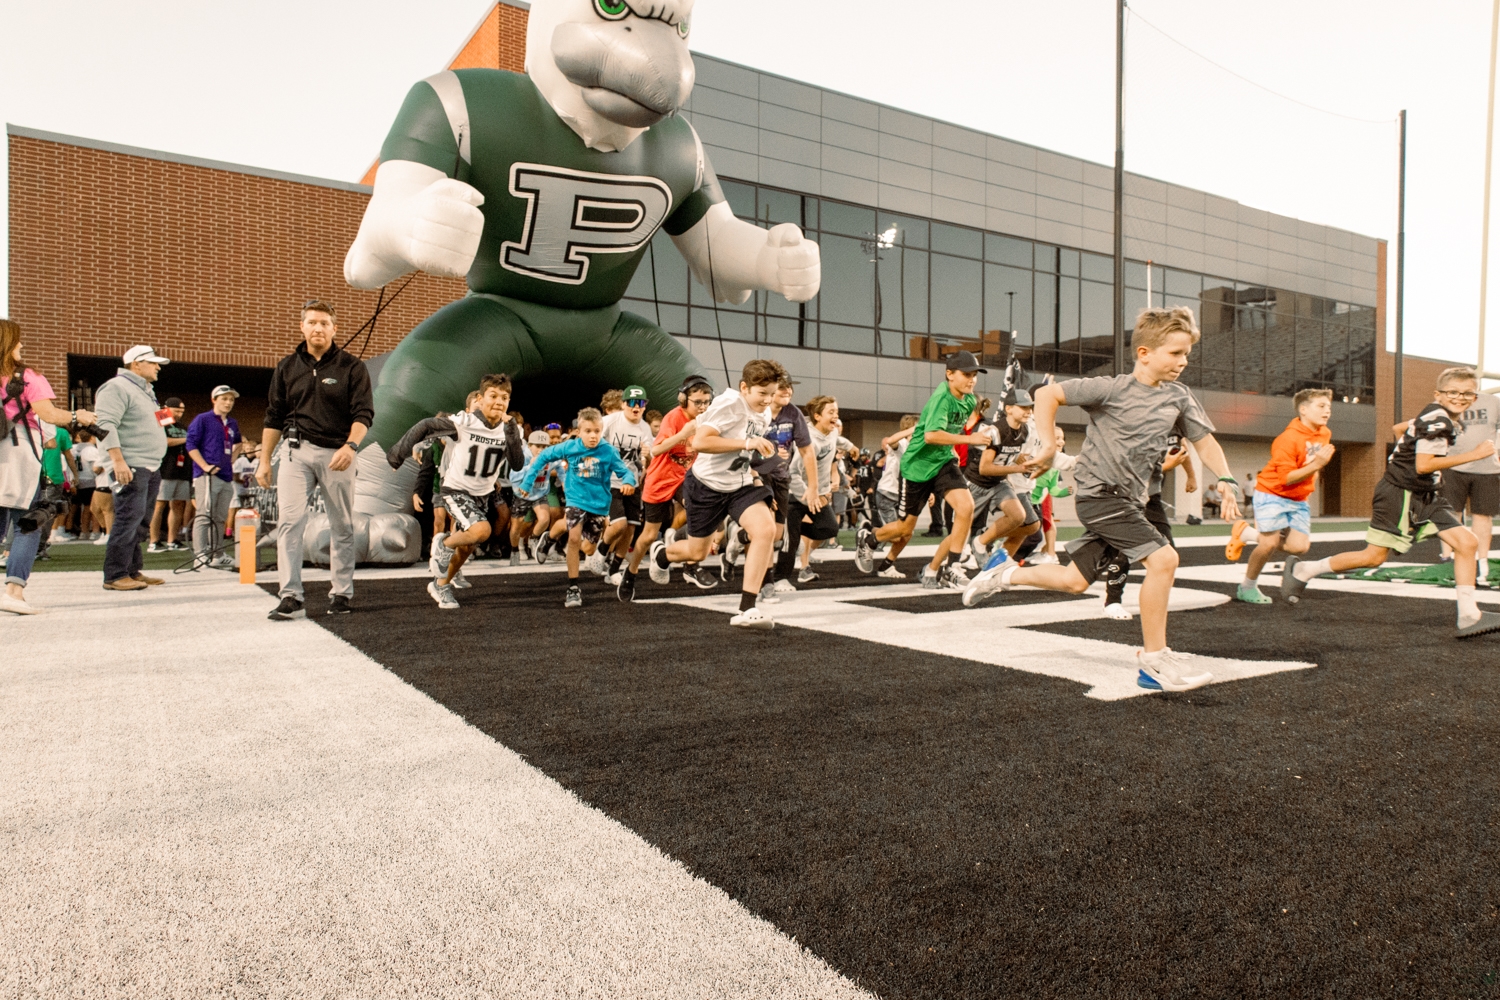 Charging down the field, the Prosper Flight Crew makes their way out of the tunnel. Every student involved in the program is assigned a football player to be their buddy for the game. Players exchange letters with the kids, and attend games throughout the year to support them. 